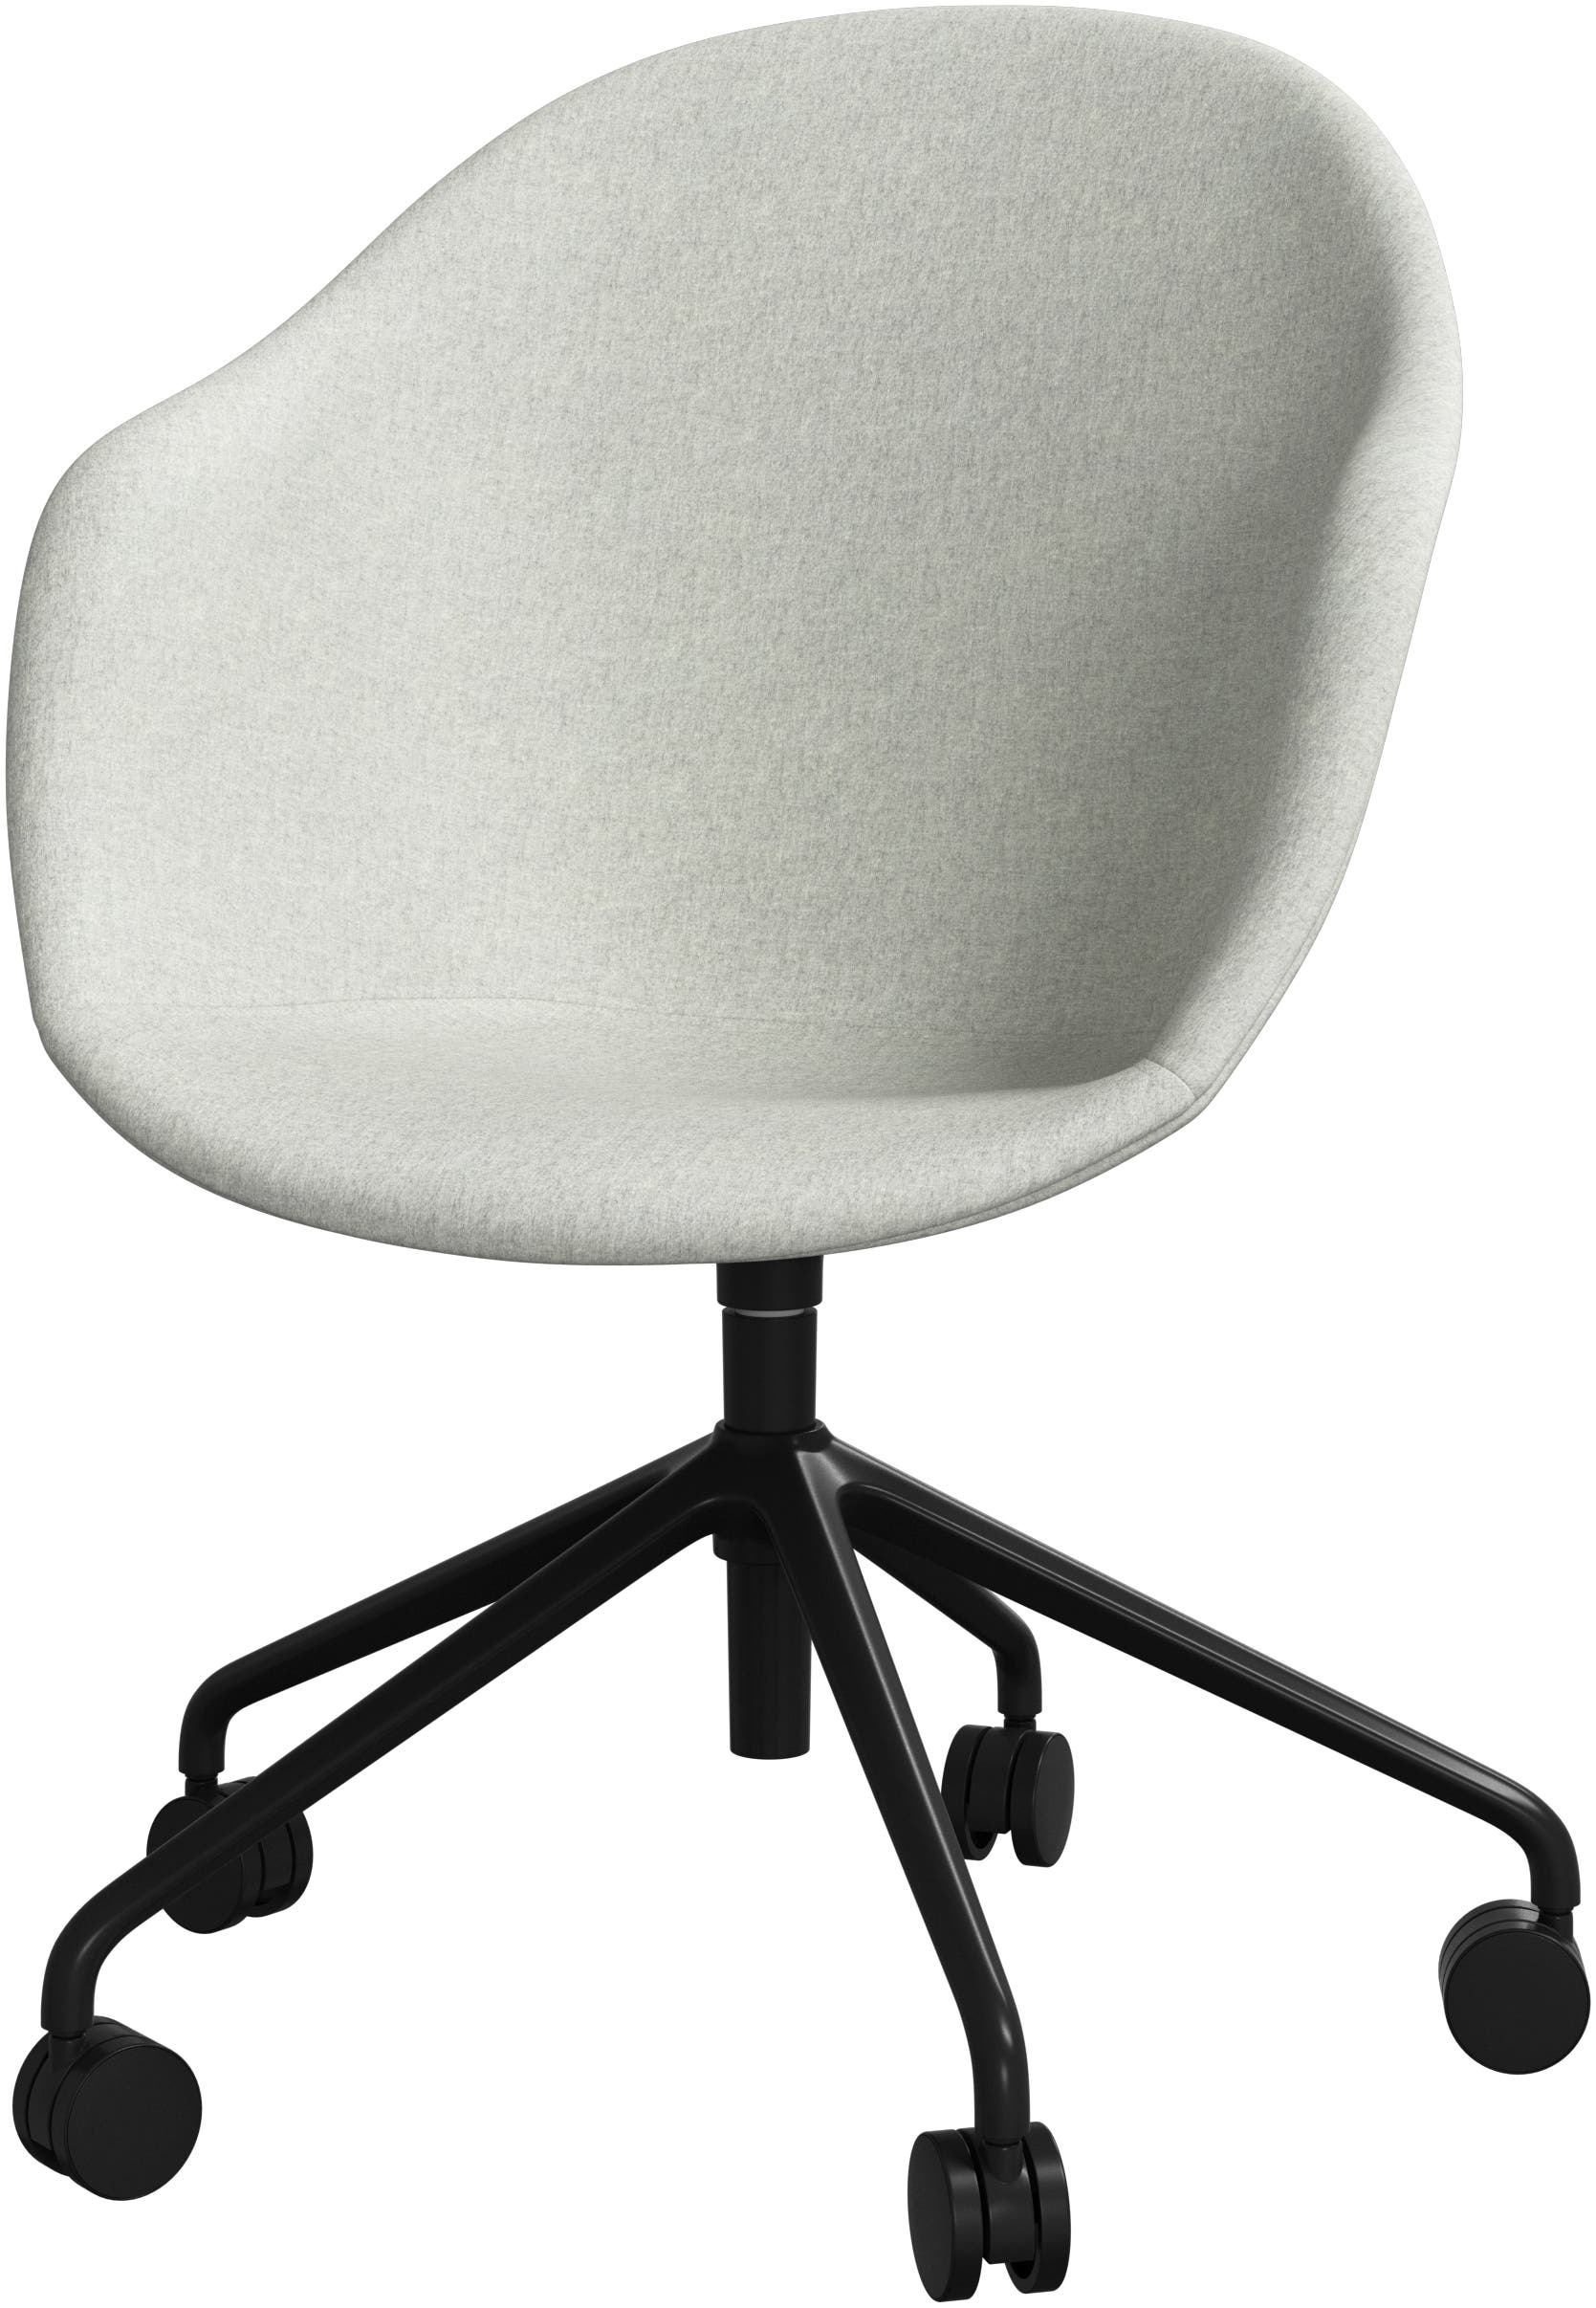 Adelaide office chair